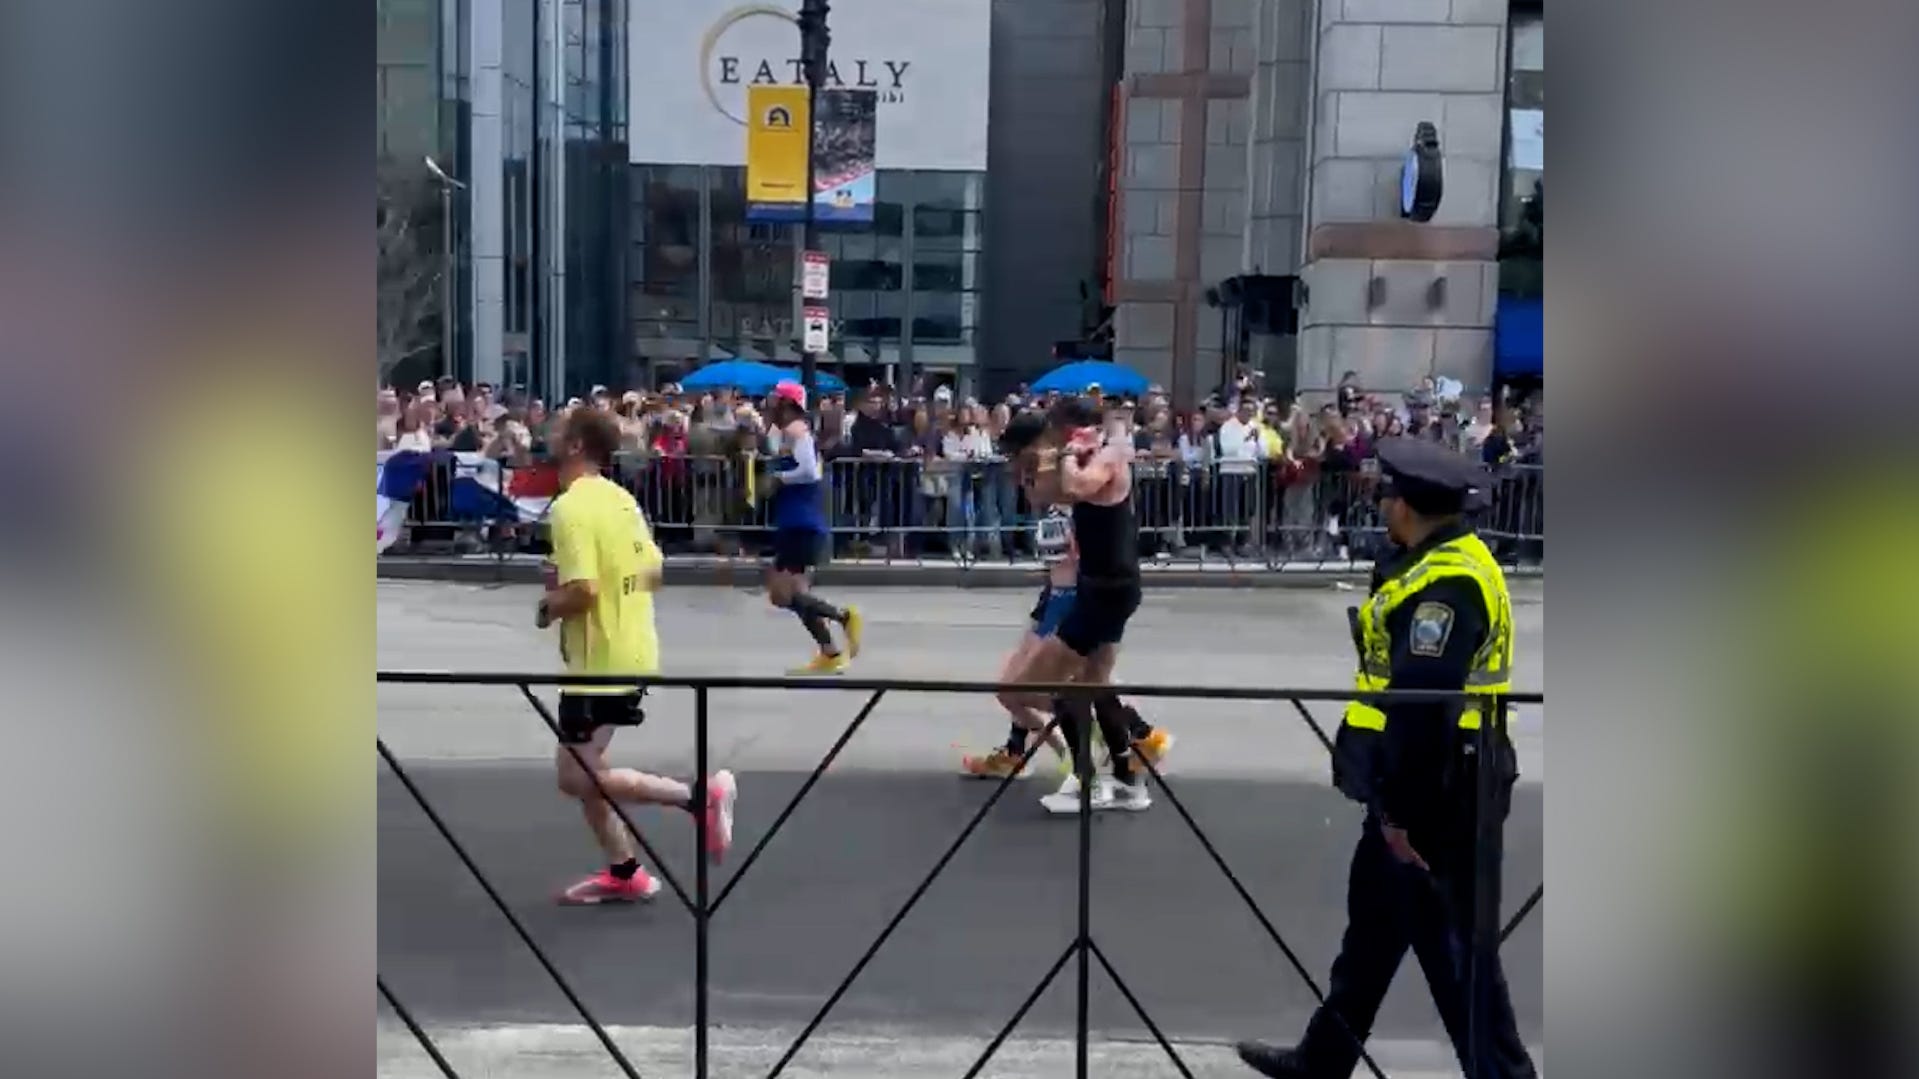 Watch the Boston Marathon unite runners as they help injured peers to finish the race